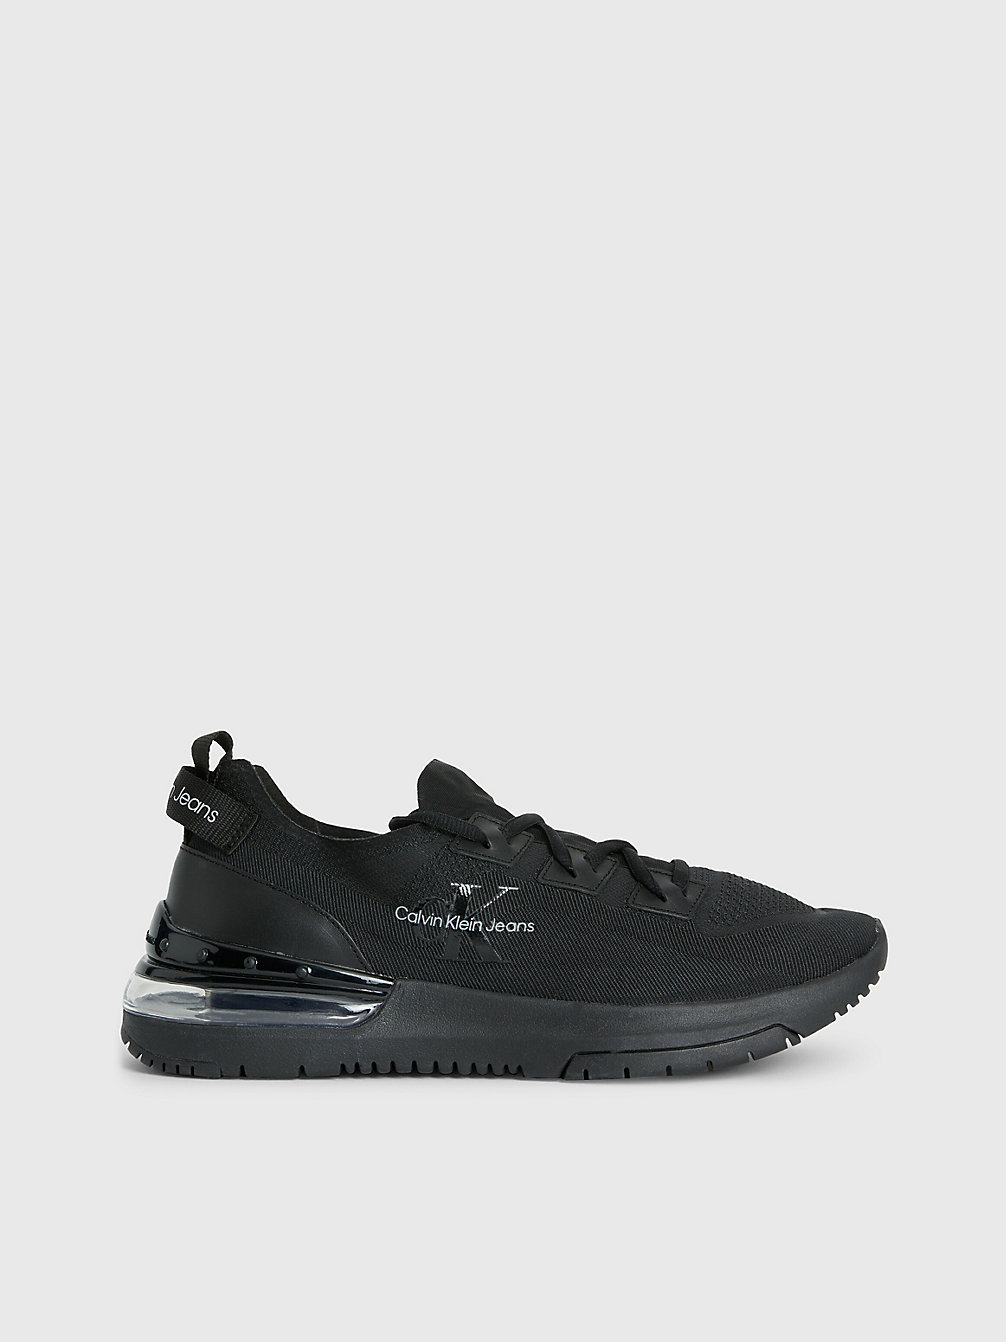 TRIPLE BLACK Recycled Knit Trainers undefined men Calvin Klein